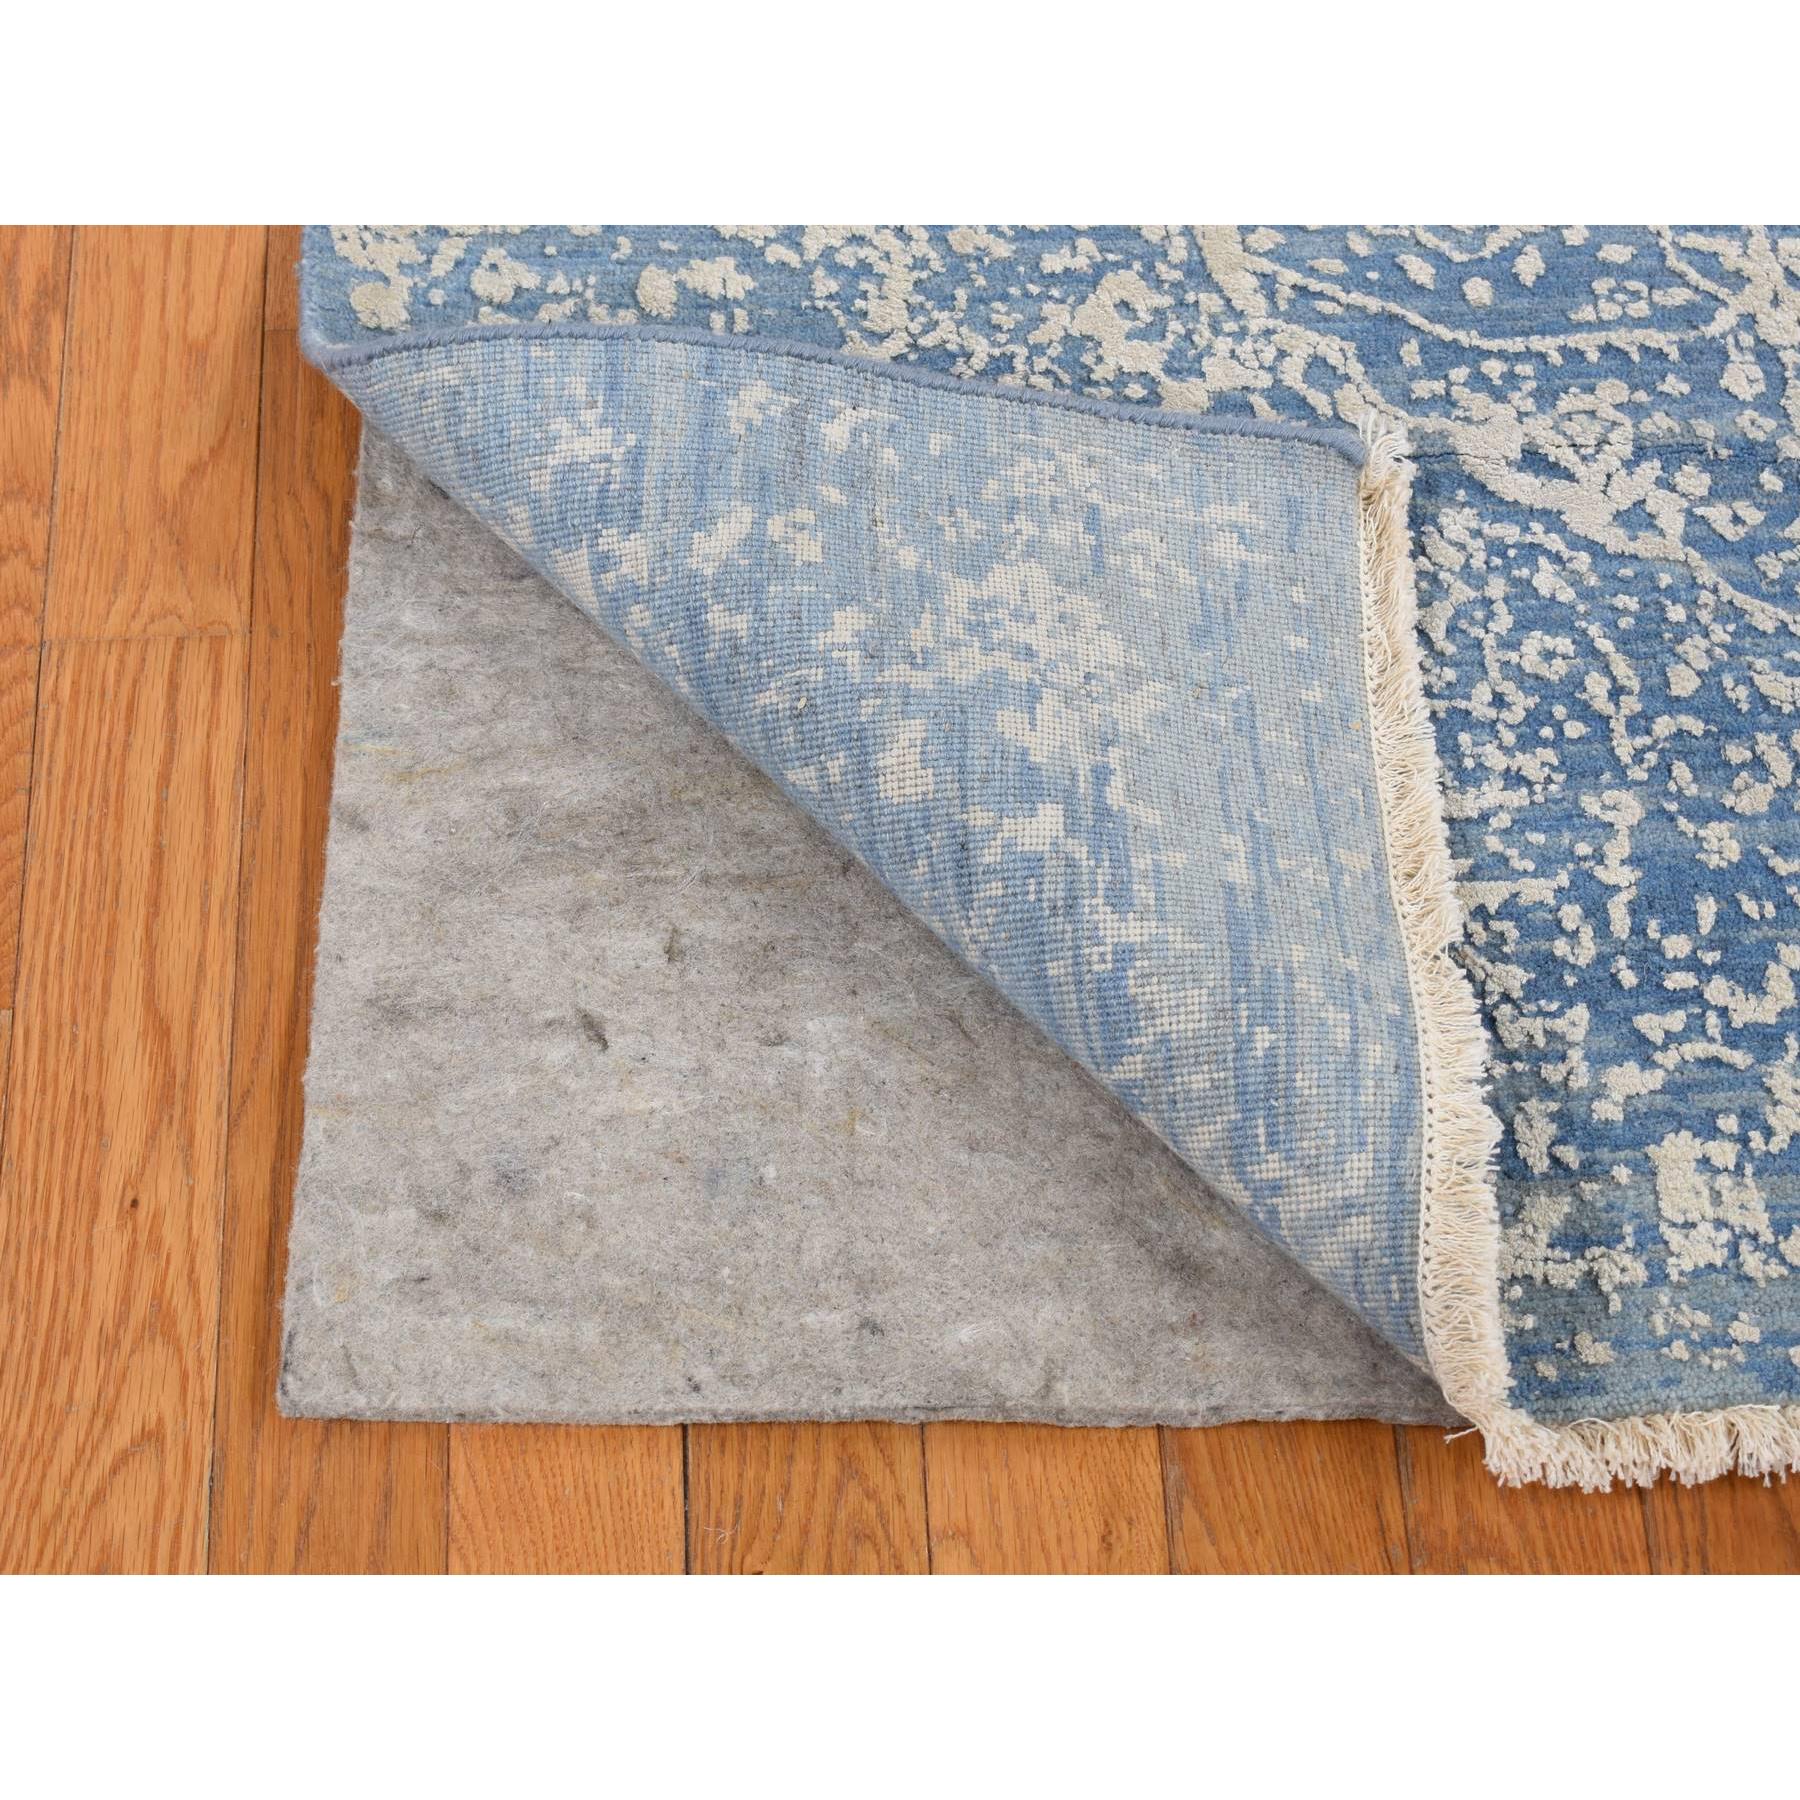  Silk Hand-Knotted Area Rug 5'1